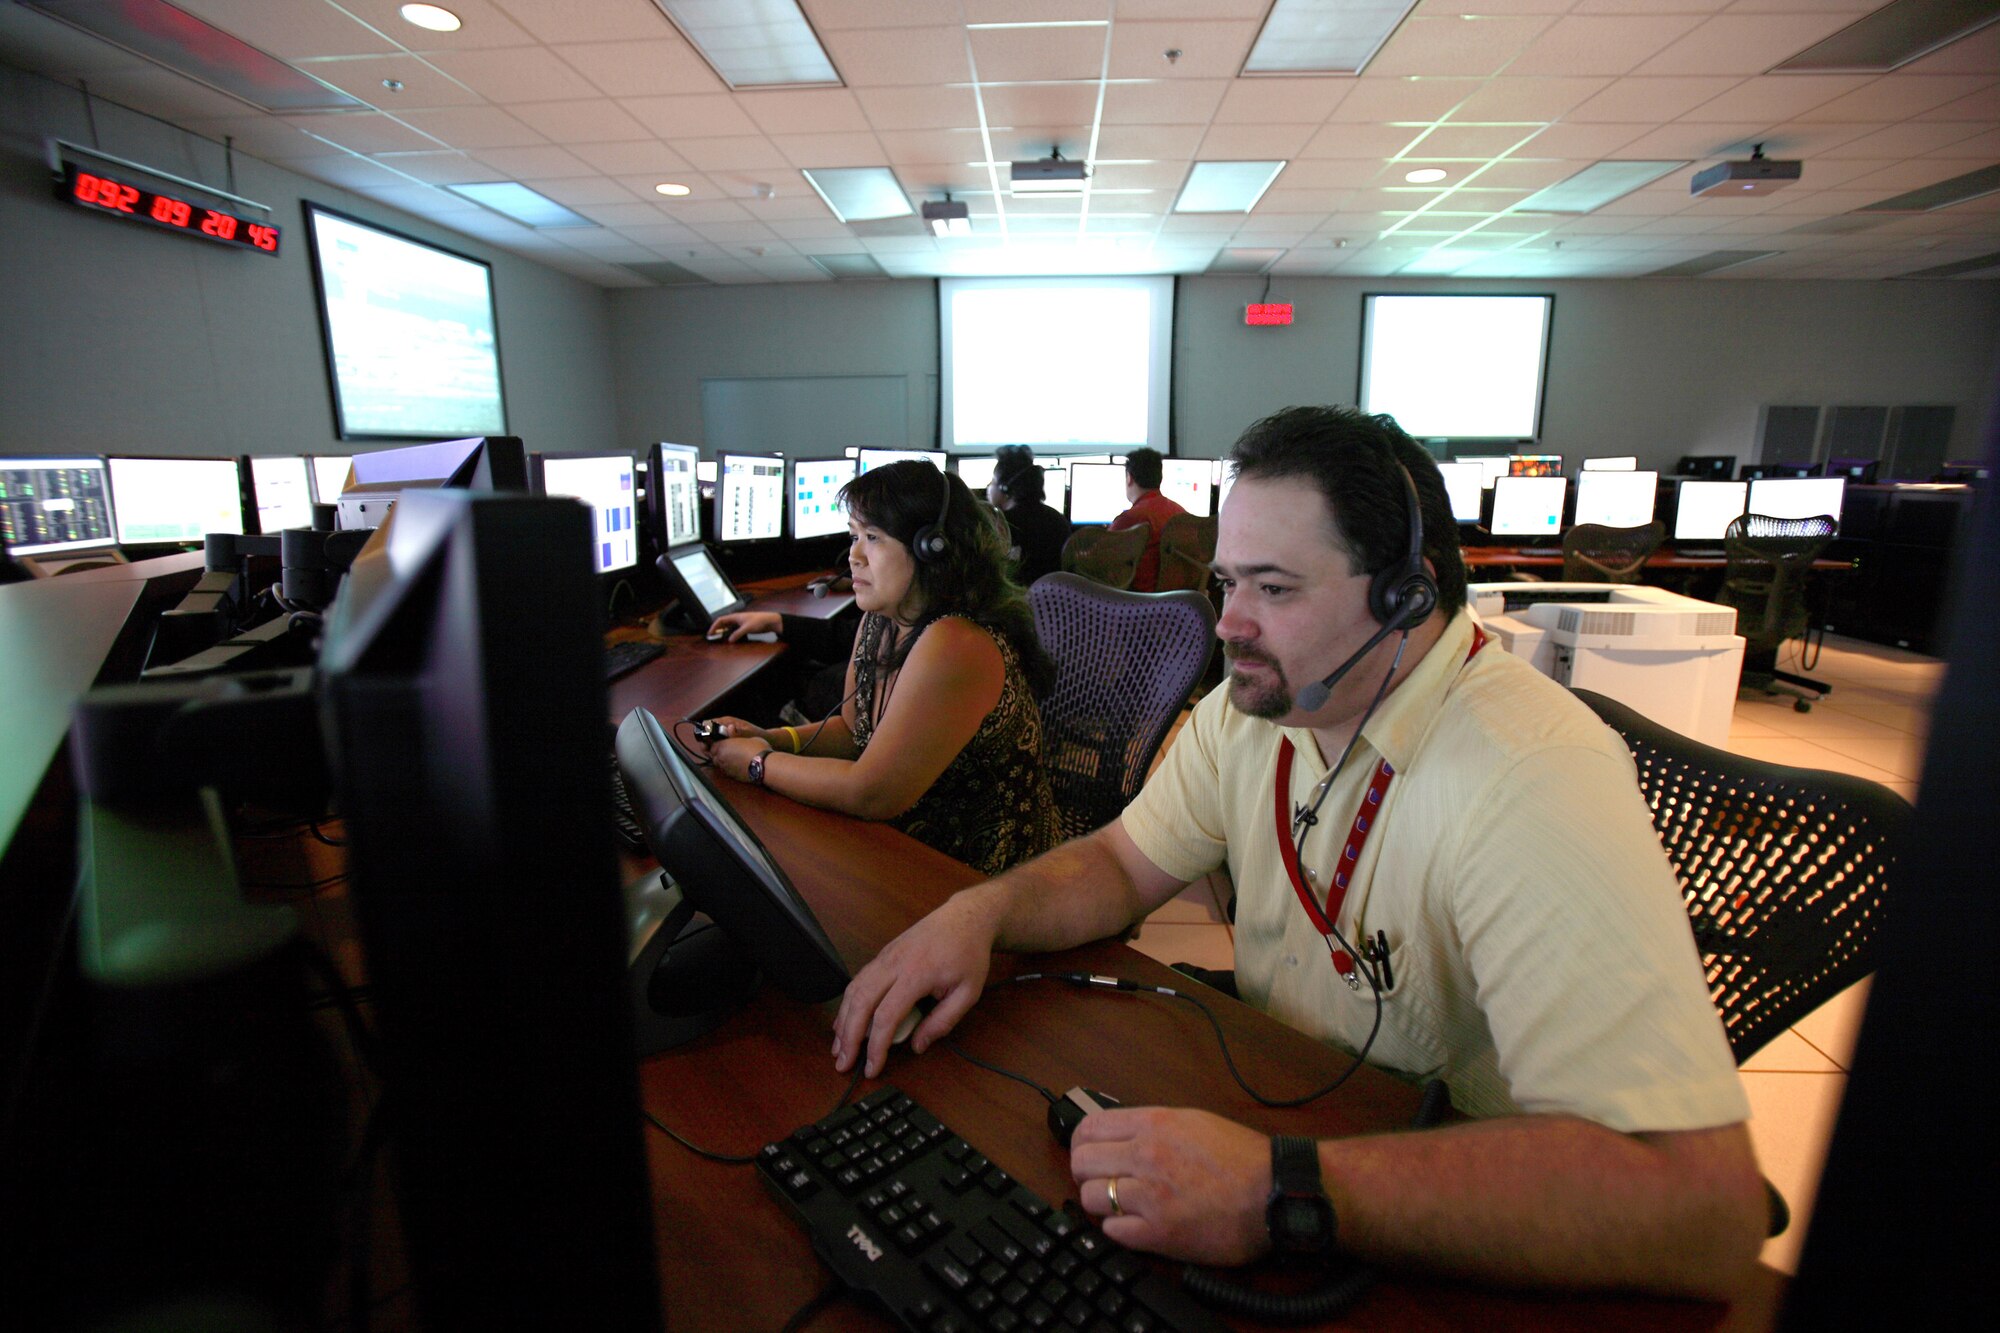 Thomas Caputo, 412th Test Wing security administrator, and Cathy De Lima, 412th Range Squadron range control officer perform computer diagnostics at the F-35 Integrated Test Force control room here April 2. (Photo by Jet Fabara)